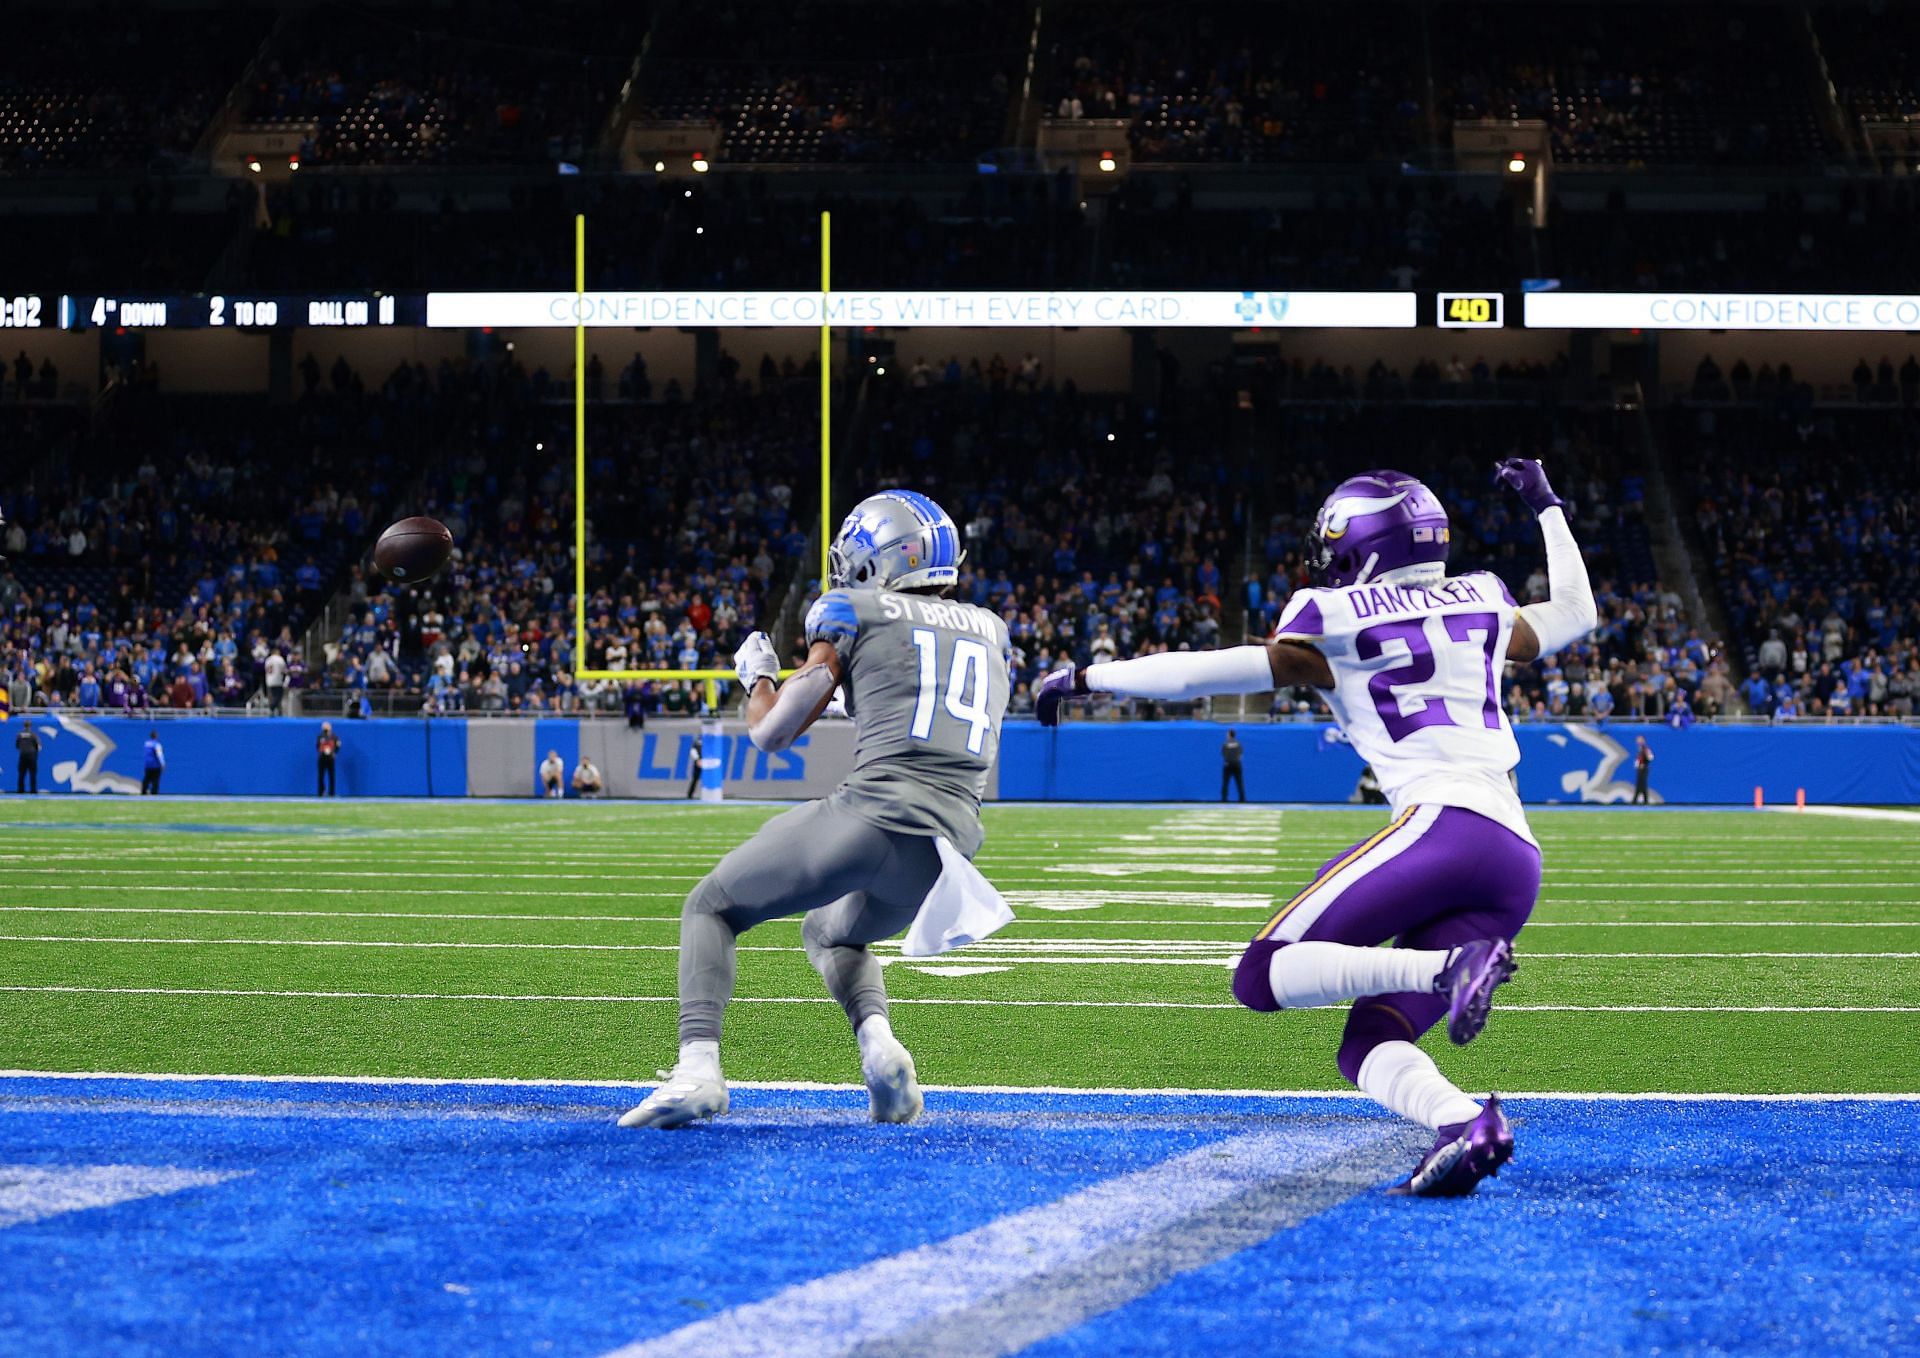 Lions receiver St. Brown catches the game-winning touchdown